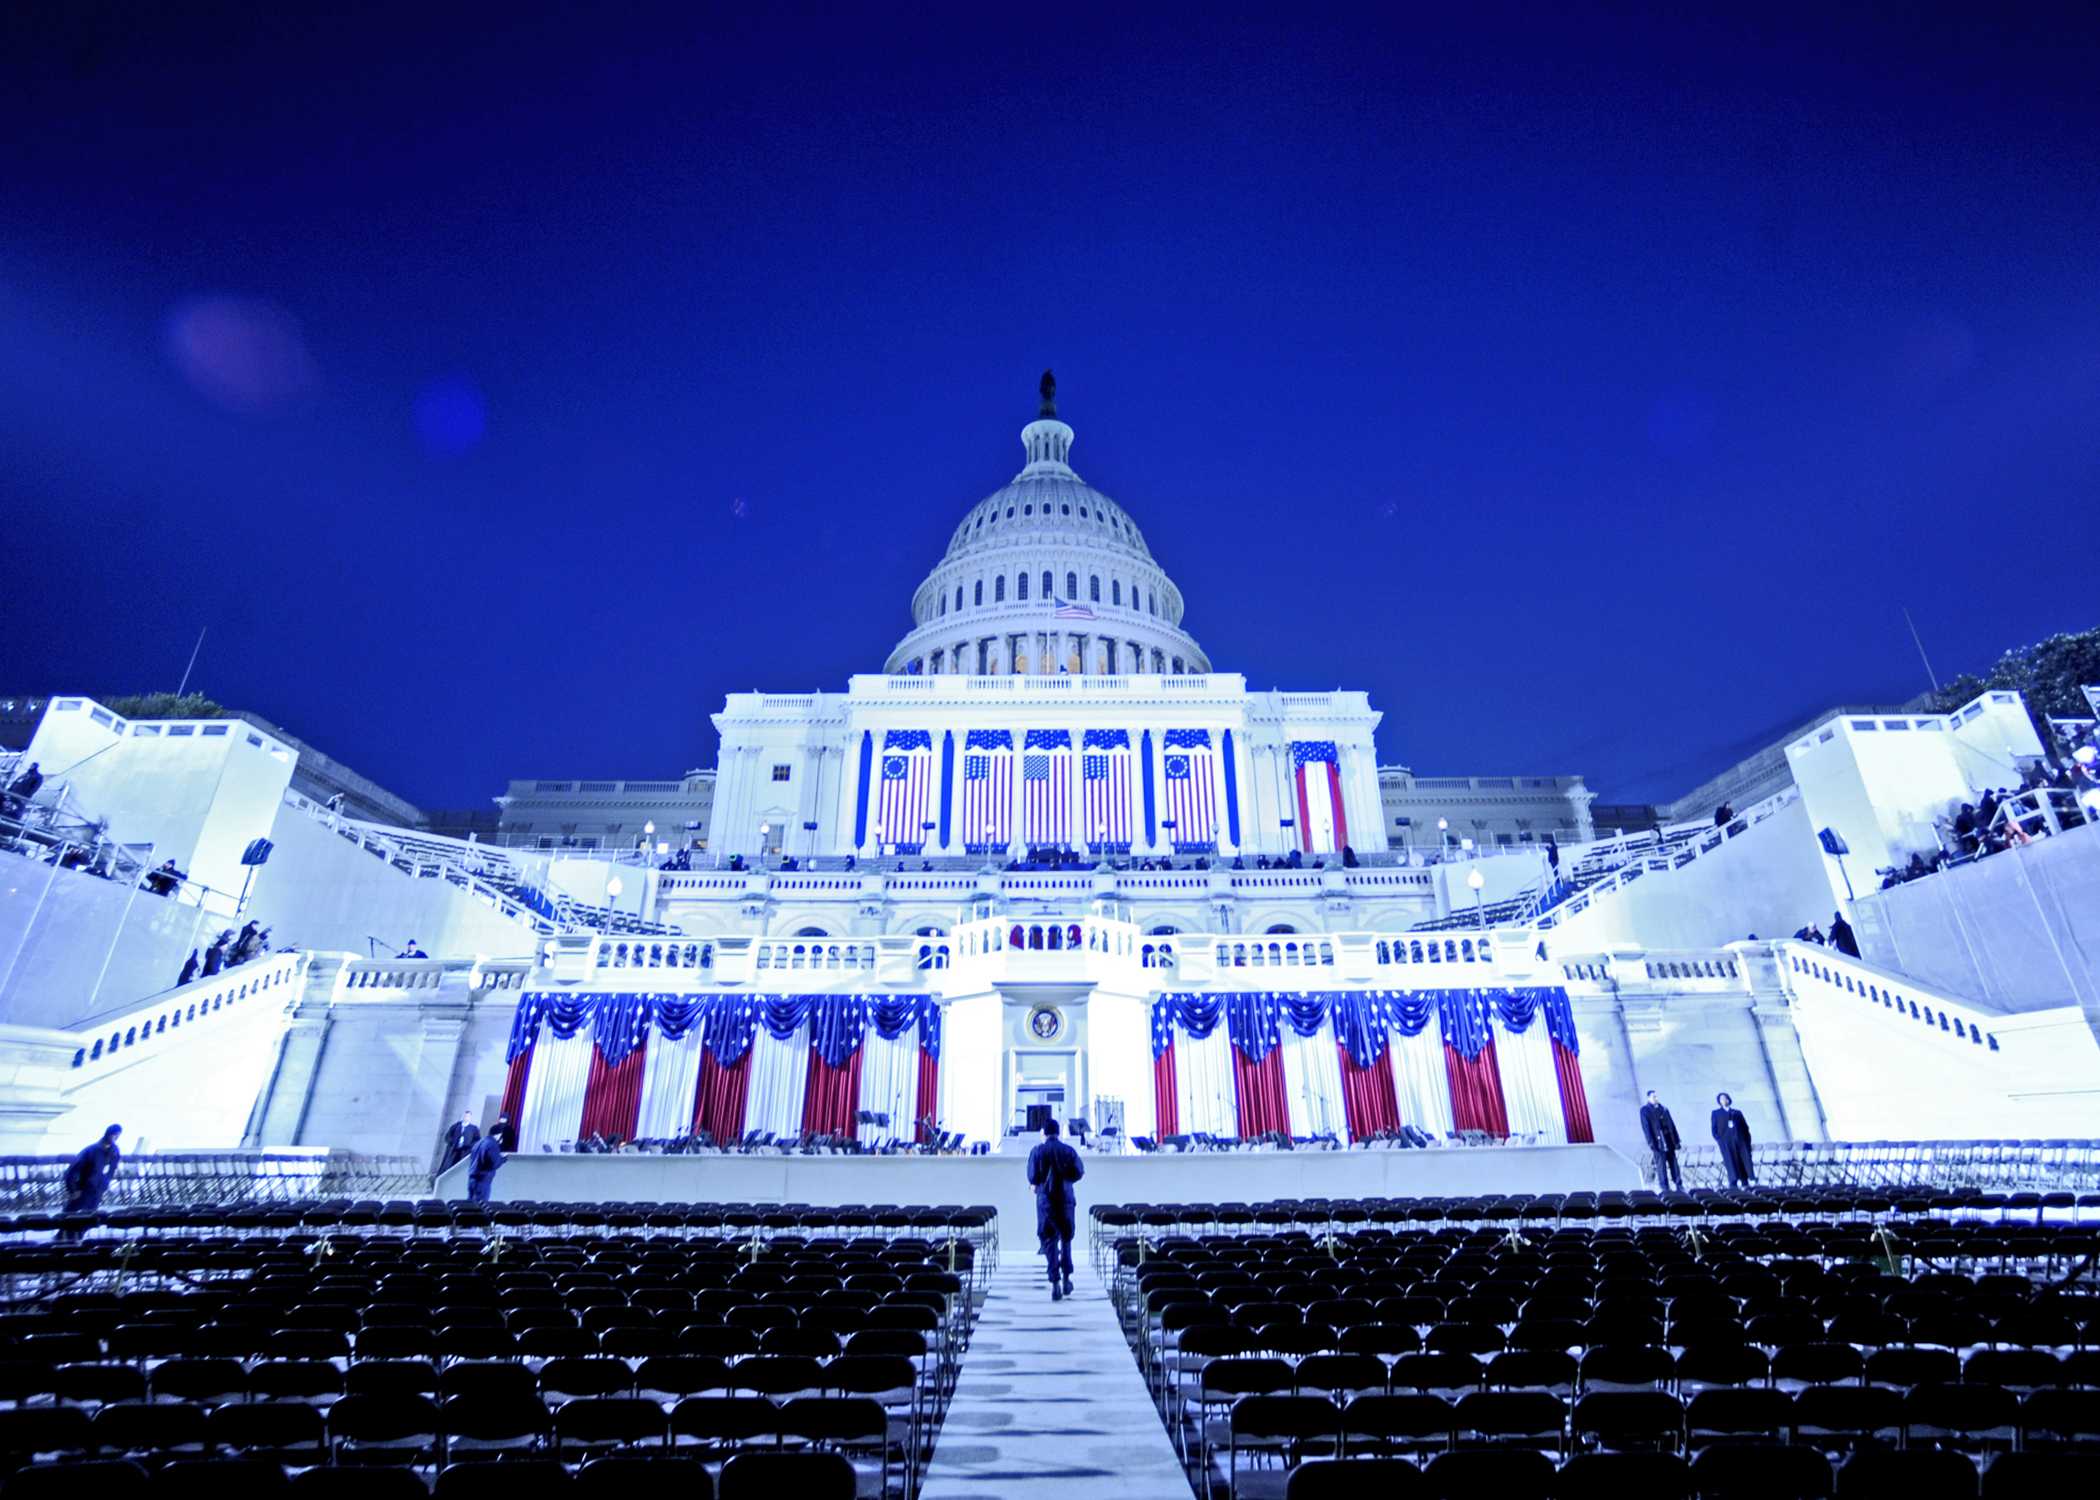 Inauguration Day will bring students to D.C.